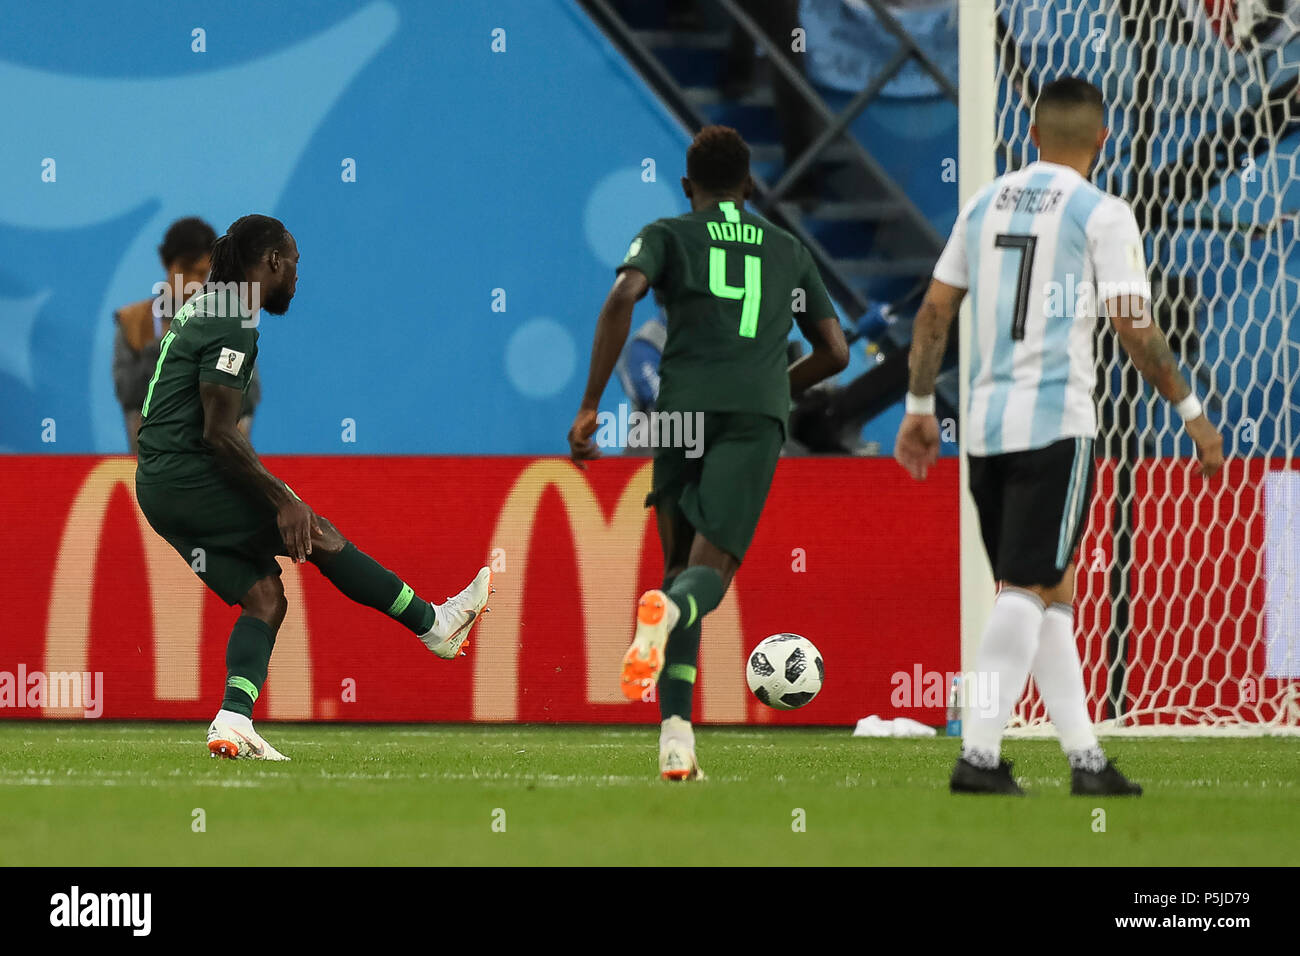 St Petersburg, Russia, 27 June 2018. Victor Moses of Nigeria scores his side's first goal to equalise and make the score 1-1 from the penalty spot during the 2018 FIFA World Cup Group D match between Nigeria and Argentina at Saint Petersburg Stadium on June 26th 2018 in Saint Petersburg, Russia. (Photo by Daniel Chesterton/phcimages.com) Credit: PHC Images/Alamy Live News Stock Photo